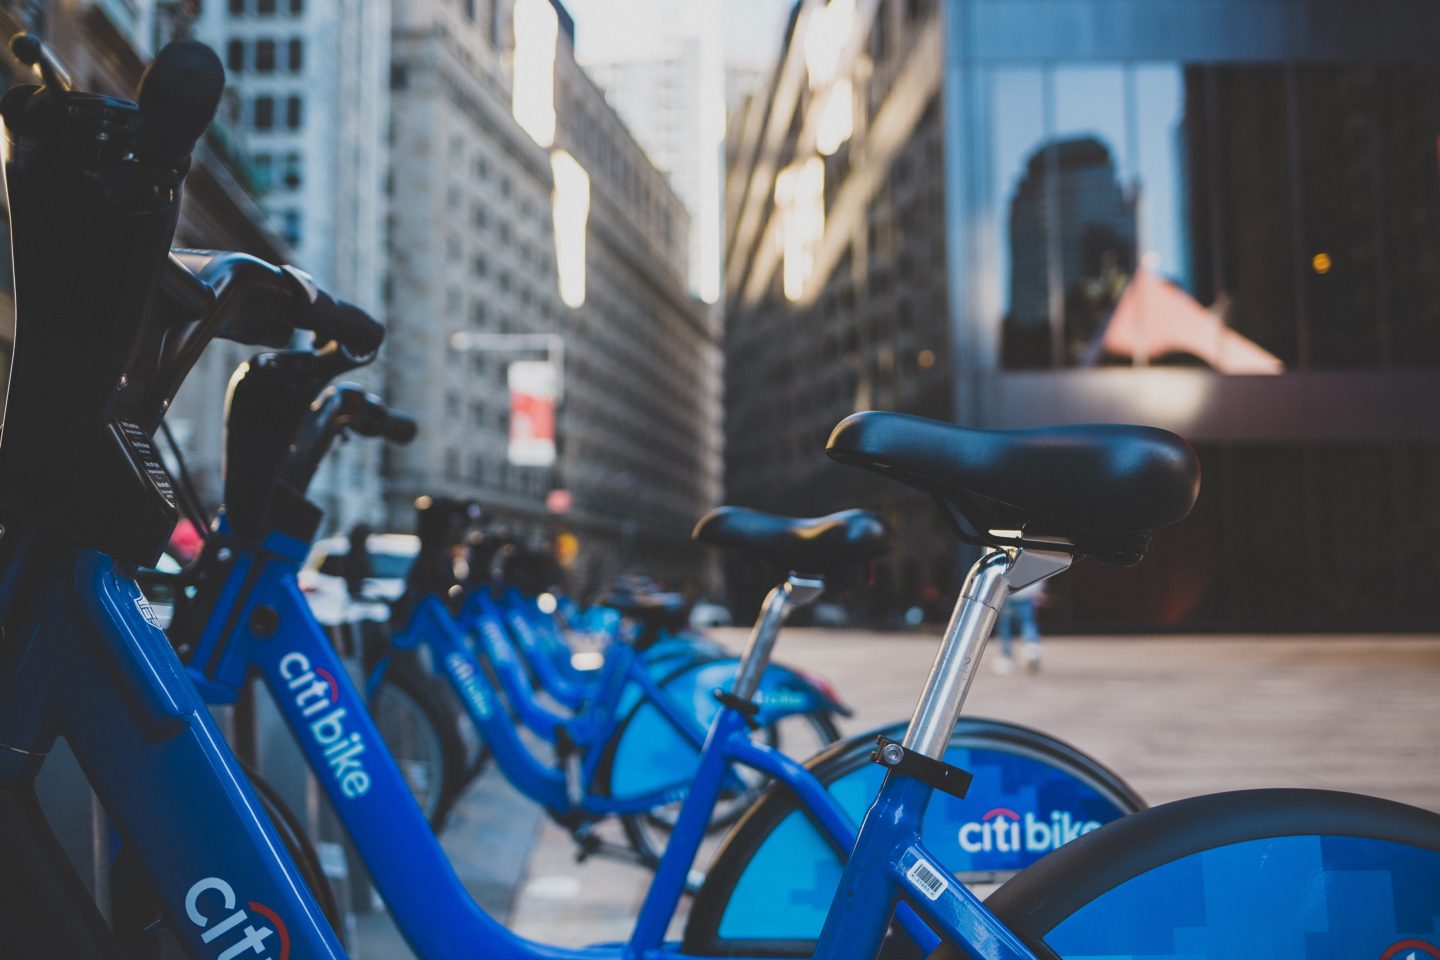 Citi bikes on the rack - a great way to enjoy a free activity in NYC